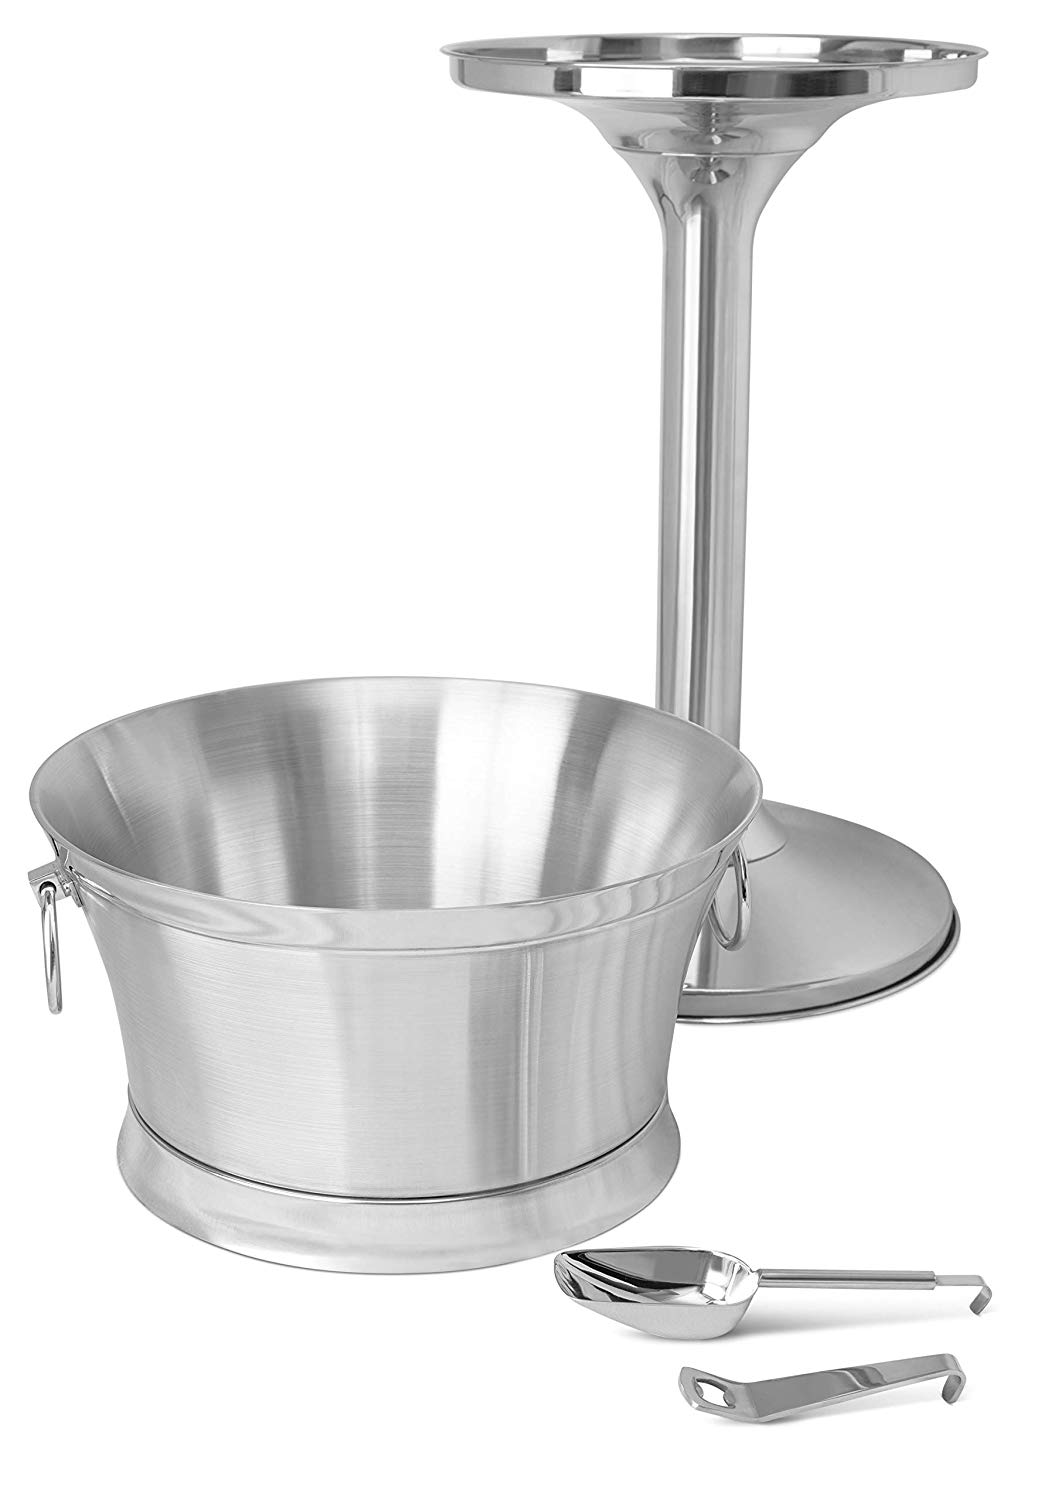 BirdRock Home 18/8 Stainless Steel 30 Qt. Beverage Tub with Stand - Silver - image 5 of 9